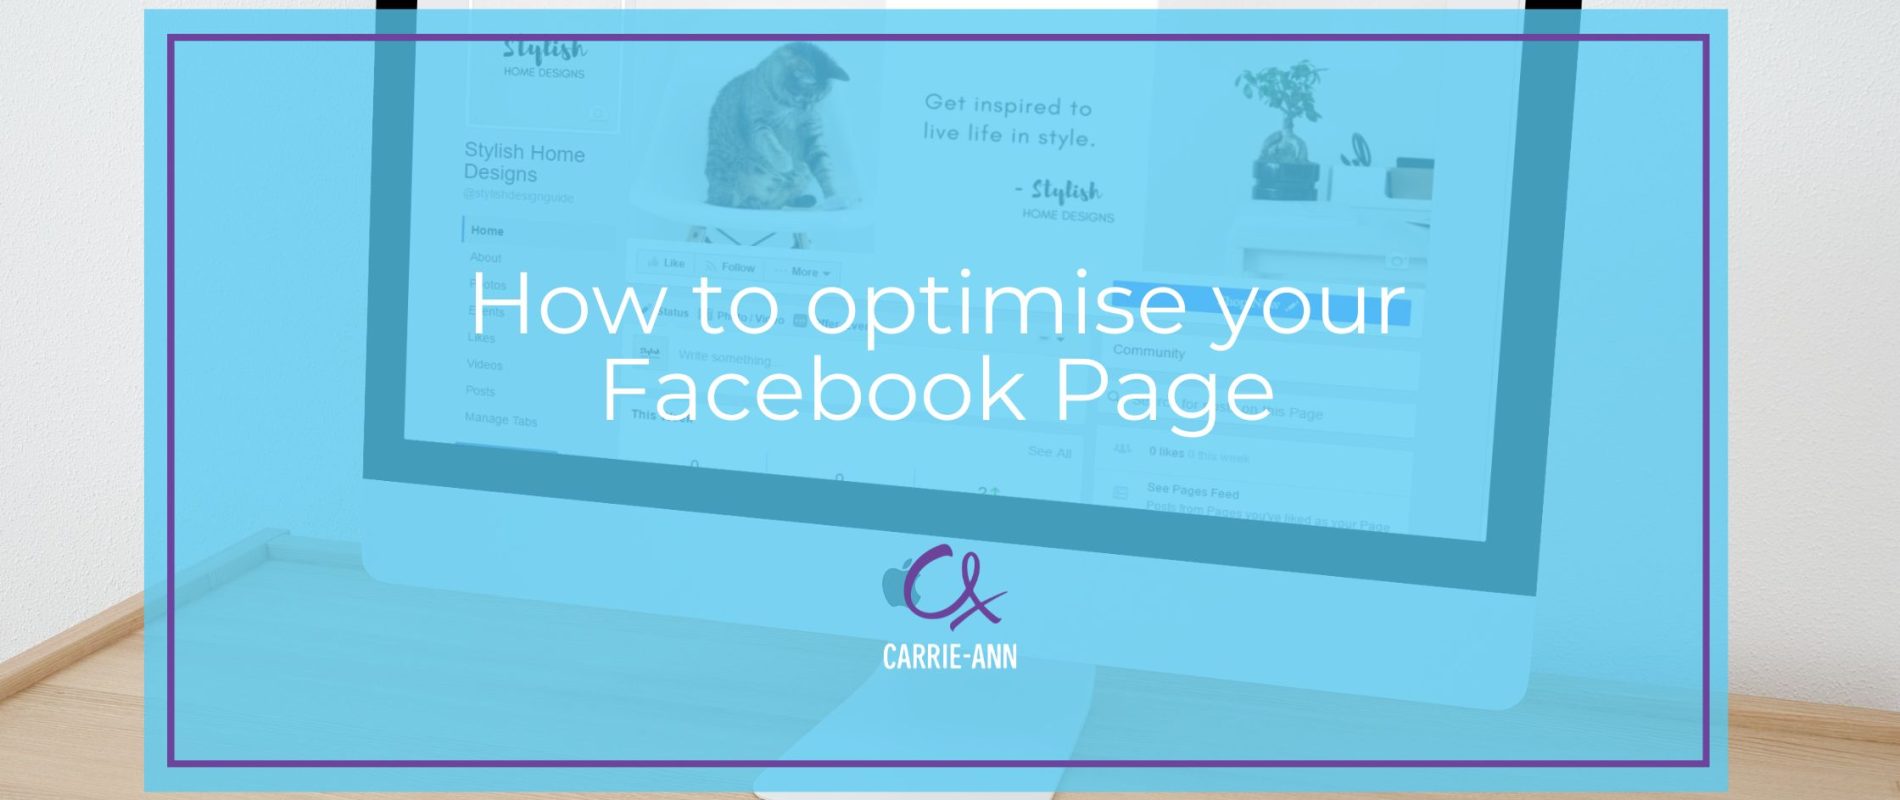 How to optimise your Facebook page